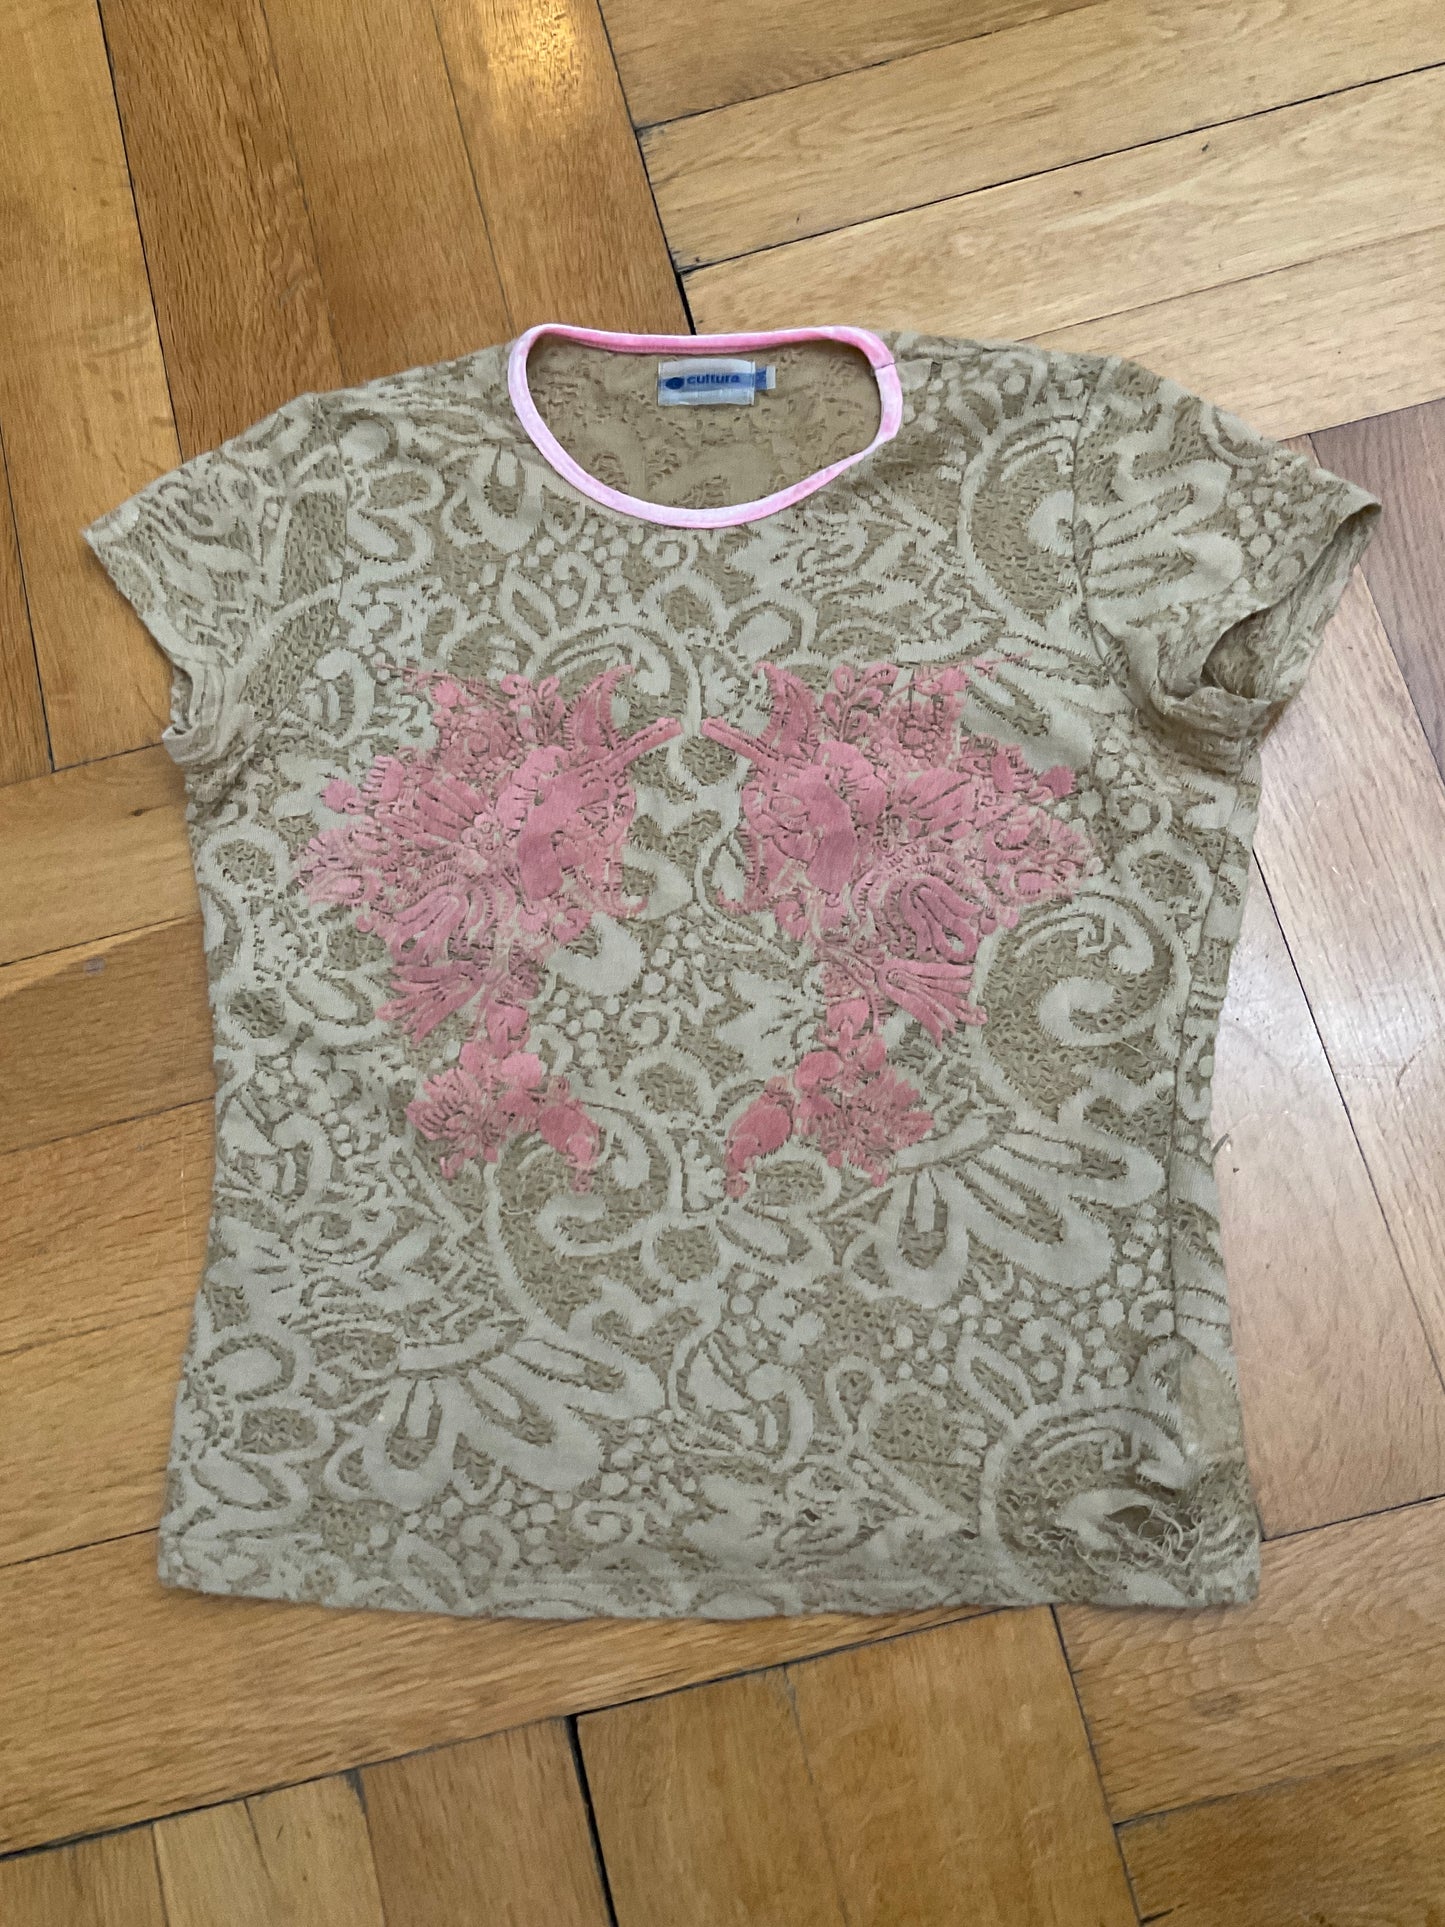 Lacey & distressed t-shirt